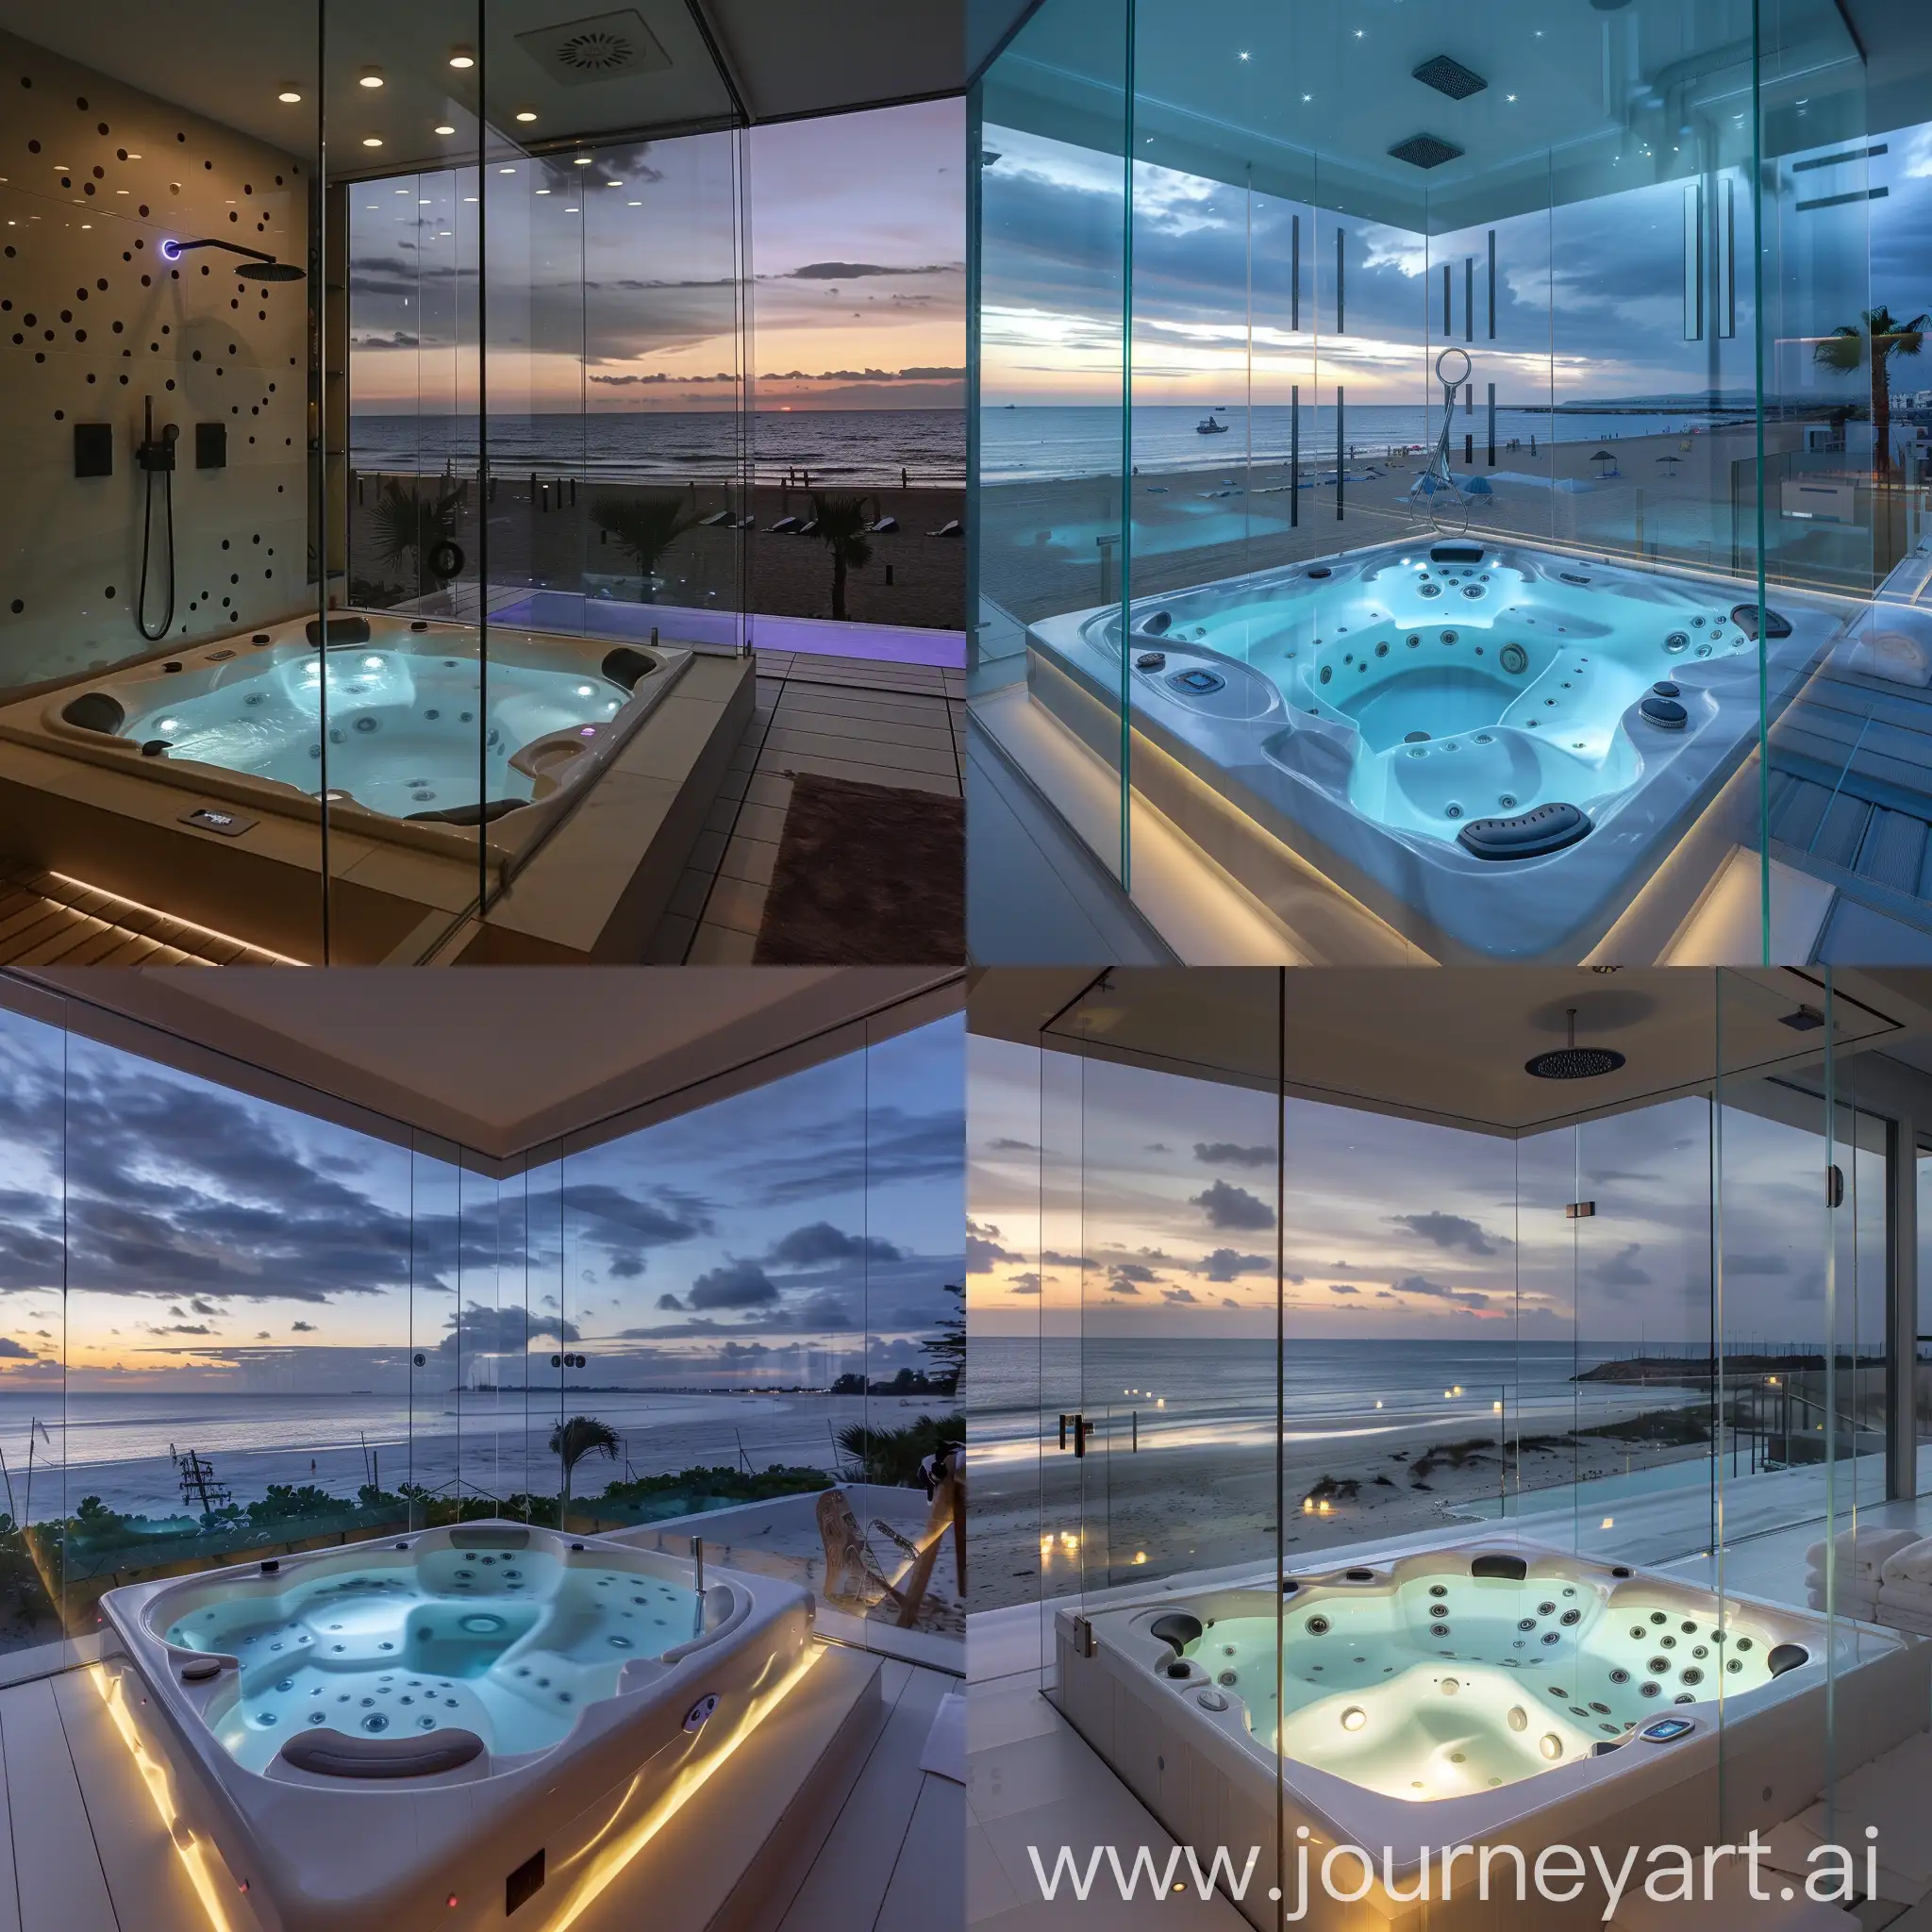 Luxurious-Glass-Bathroom-Jacuzzi-with-Ocean-View